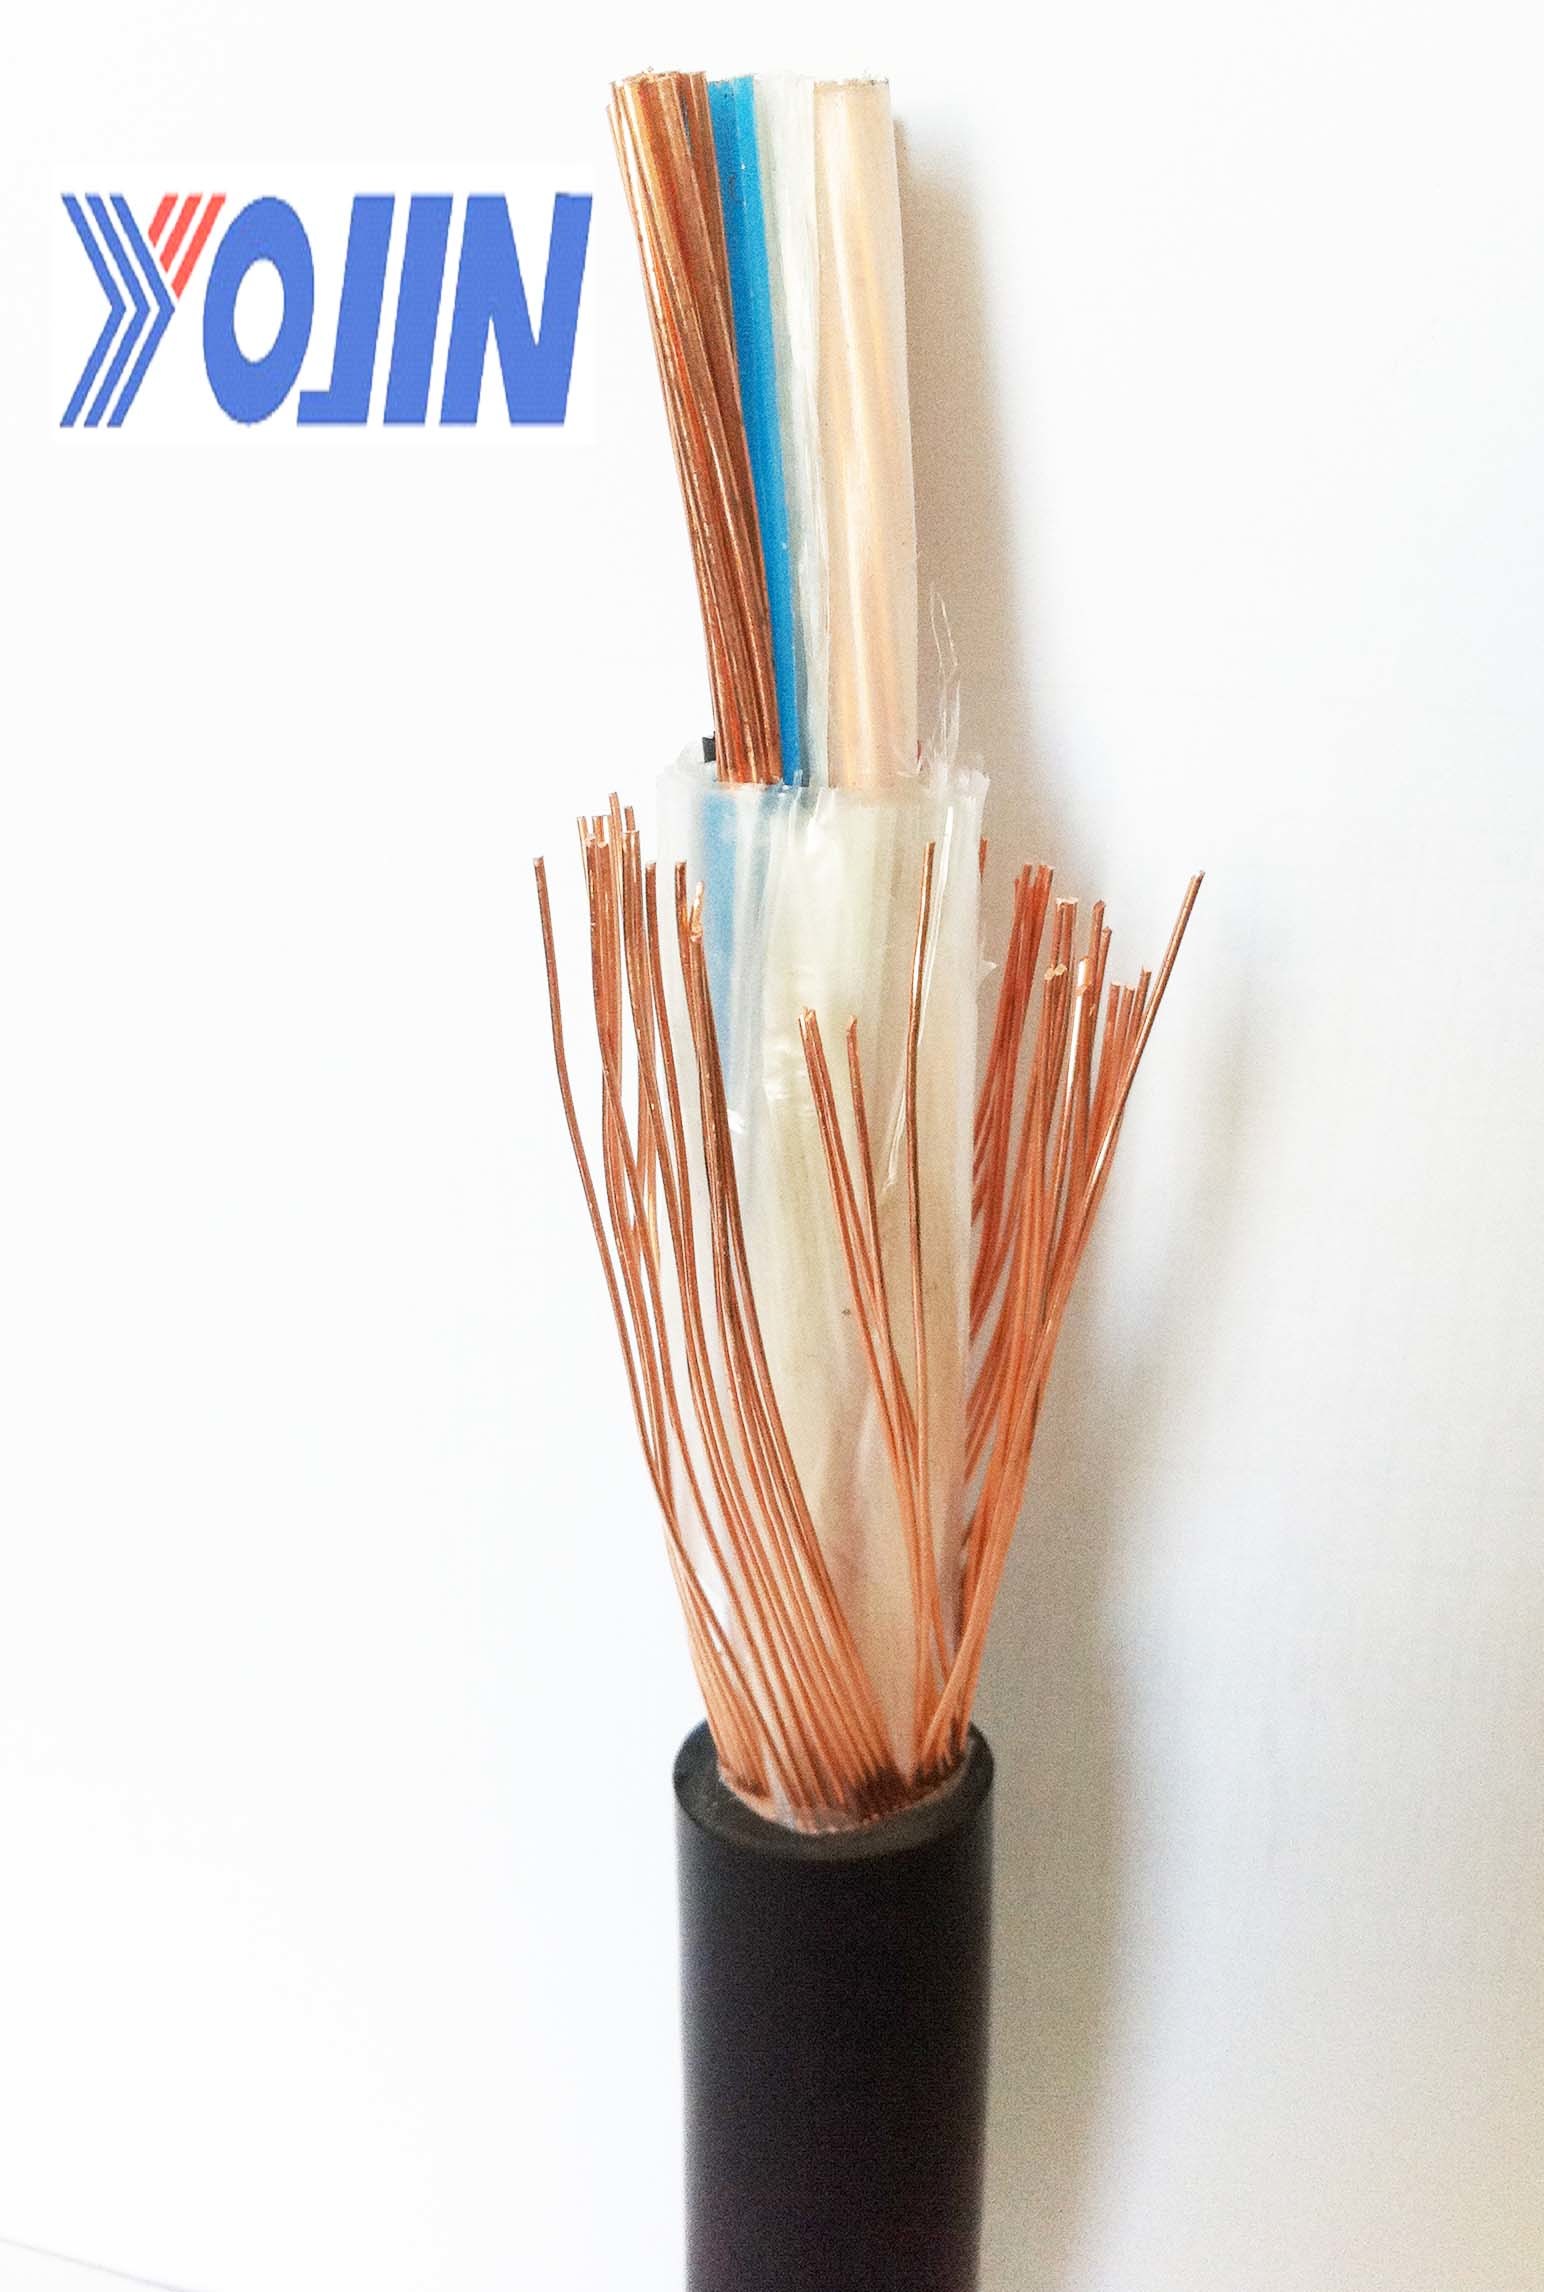 Electrical Cable Power Cable XLPE Cable Shield Cable